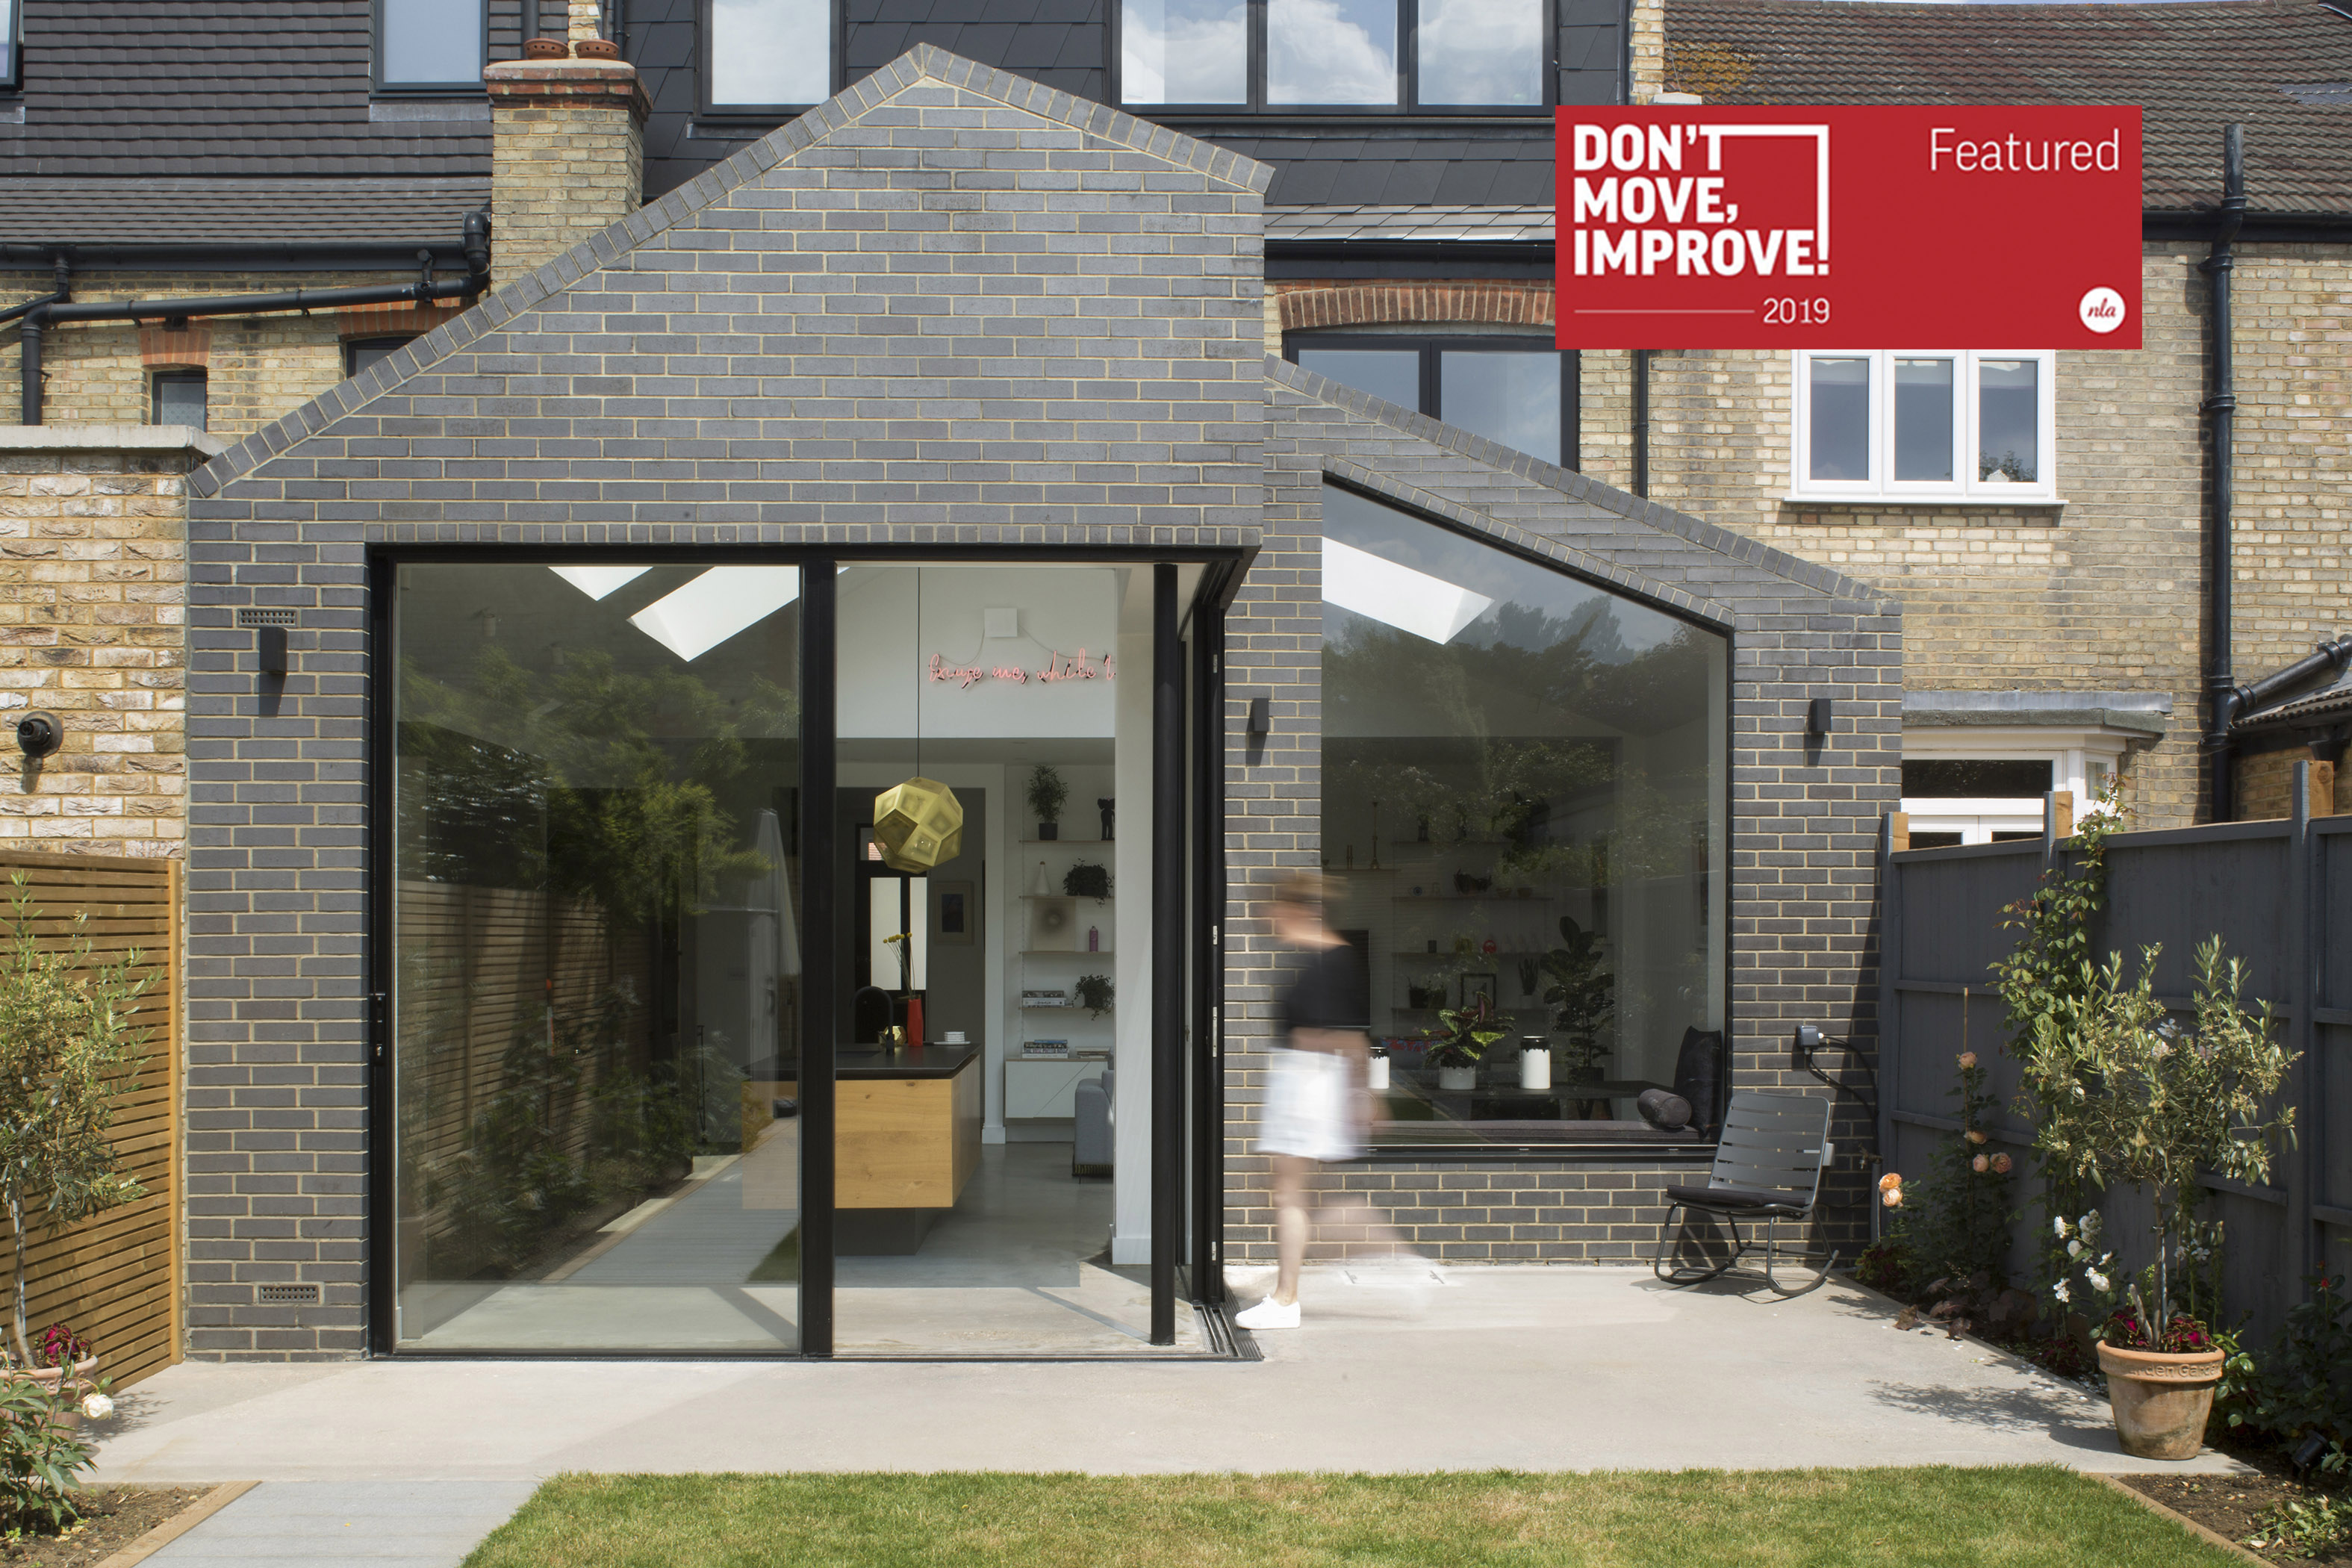 </p> <p>Find your ideal home design pro on designfor-me.com - get matched and see who's interested in your home project. Click image to see more inspiration from our design pros</p> <p>Design by Prue, architectural designer from Barnet, London</p> <p>#architecture #homedesign #modernhomes #homeinspiration #extensions #extensiondesign #extensioninspiration #extensionideas #houseextension #glazing #architecturalglazing #naturallight #slidingdoors </p> <p>